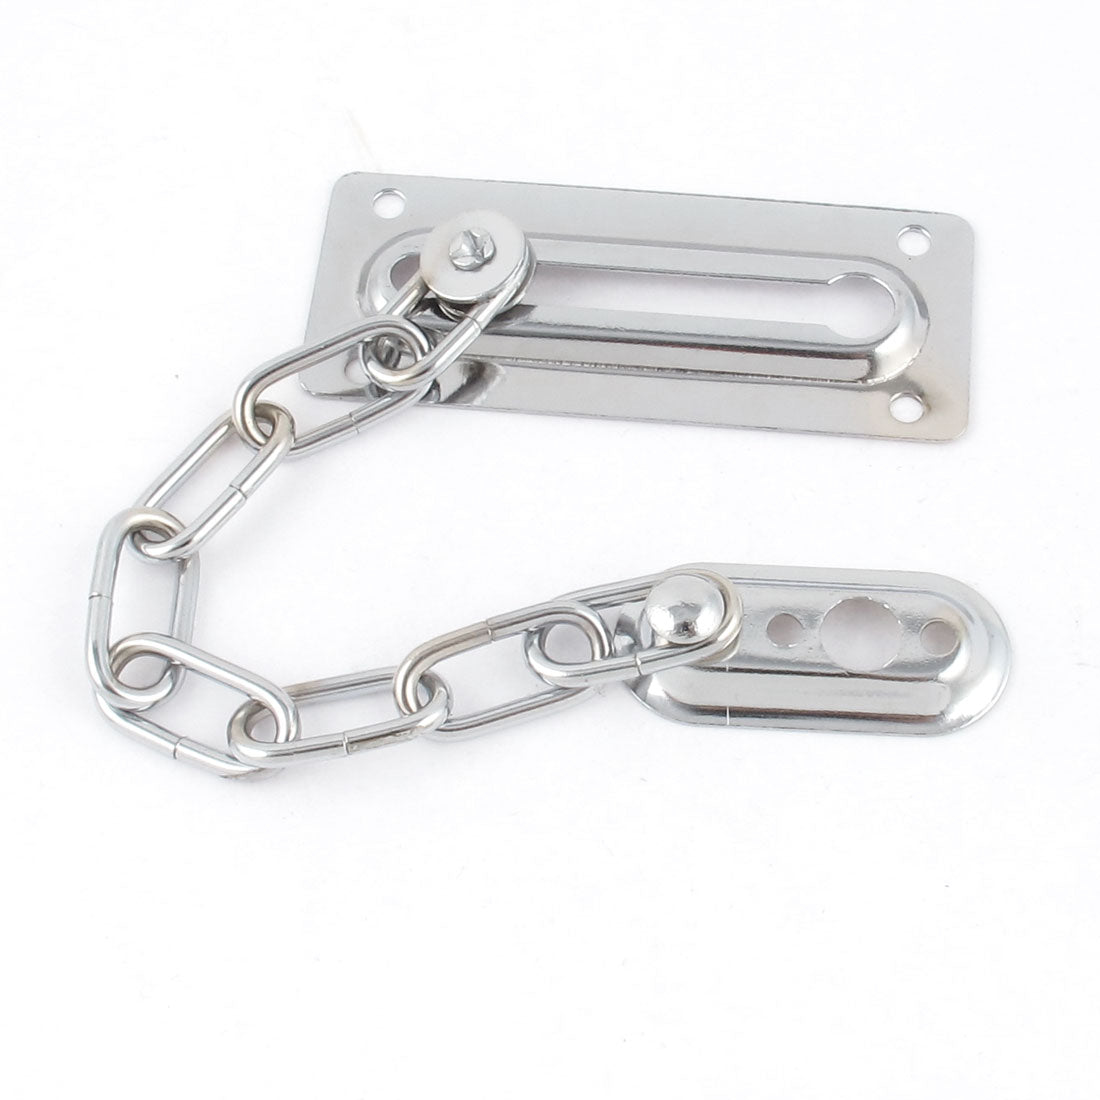 uxcell Uxcell Home Stainless Steel Security Slide Bolt Door Chain Lock Guard Silver Tone 17cm